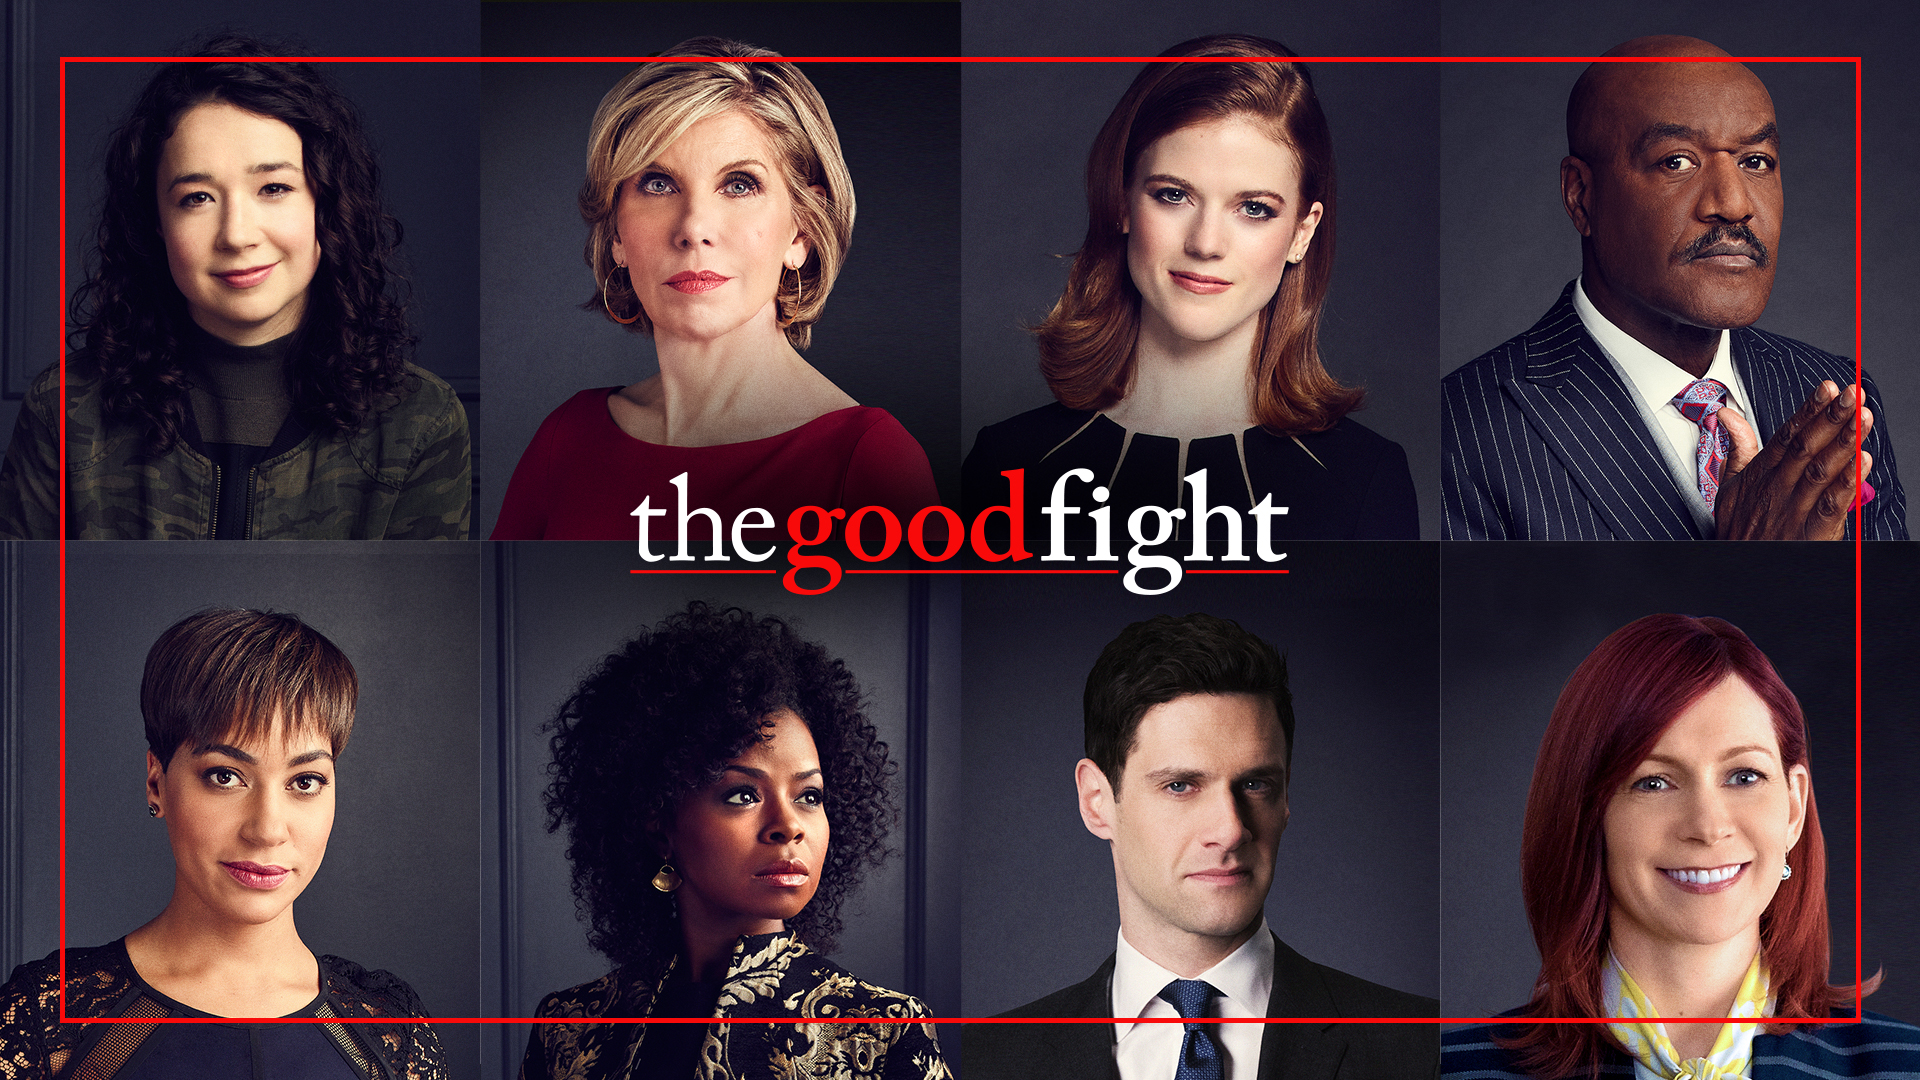 Just how well do you know The Good Fight?